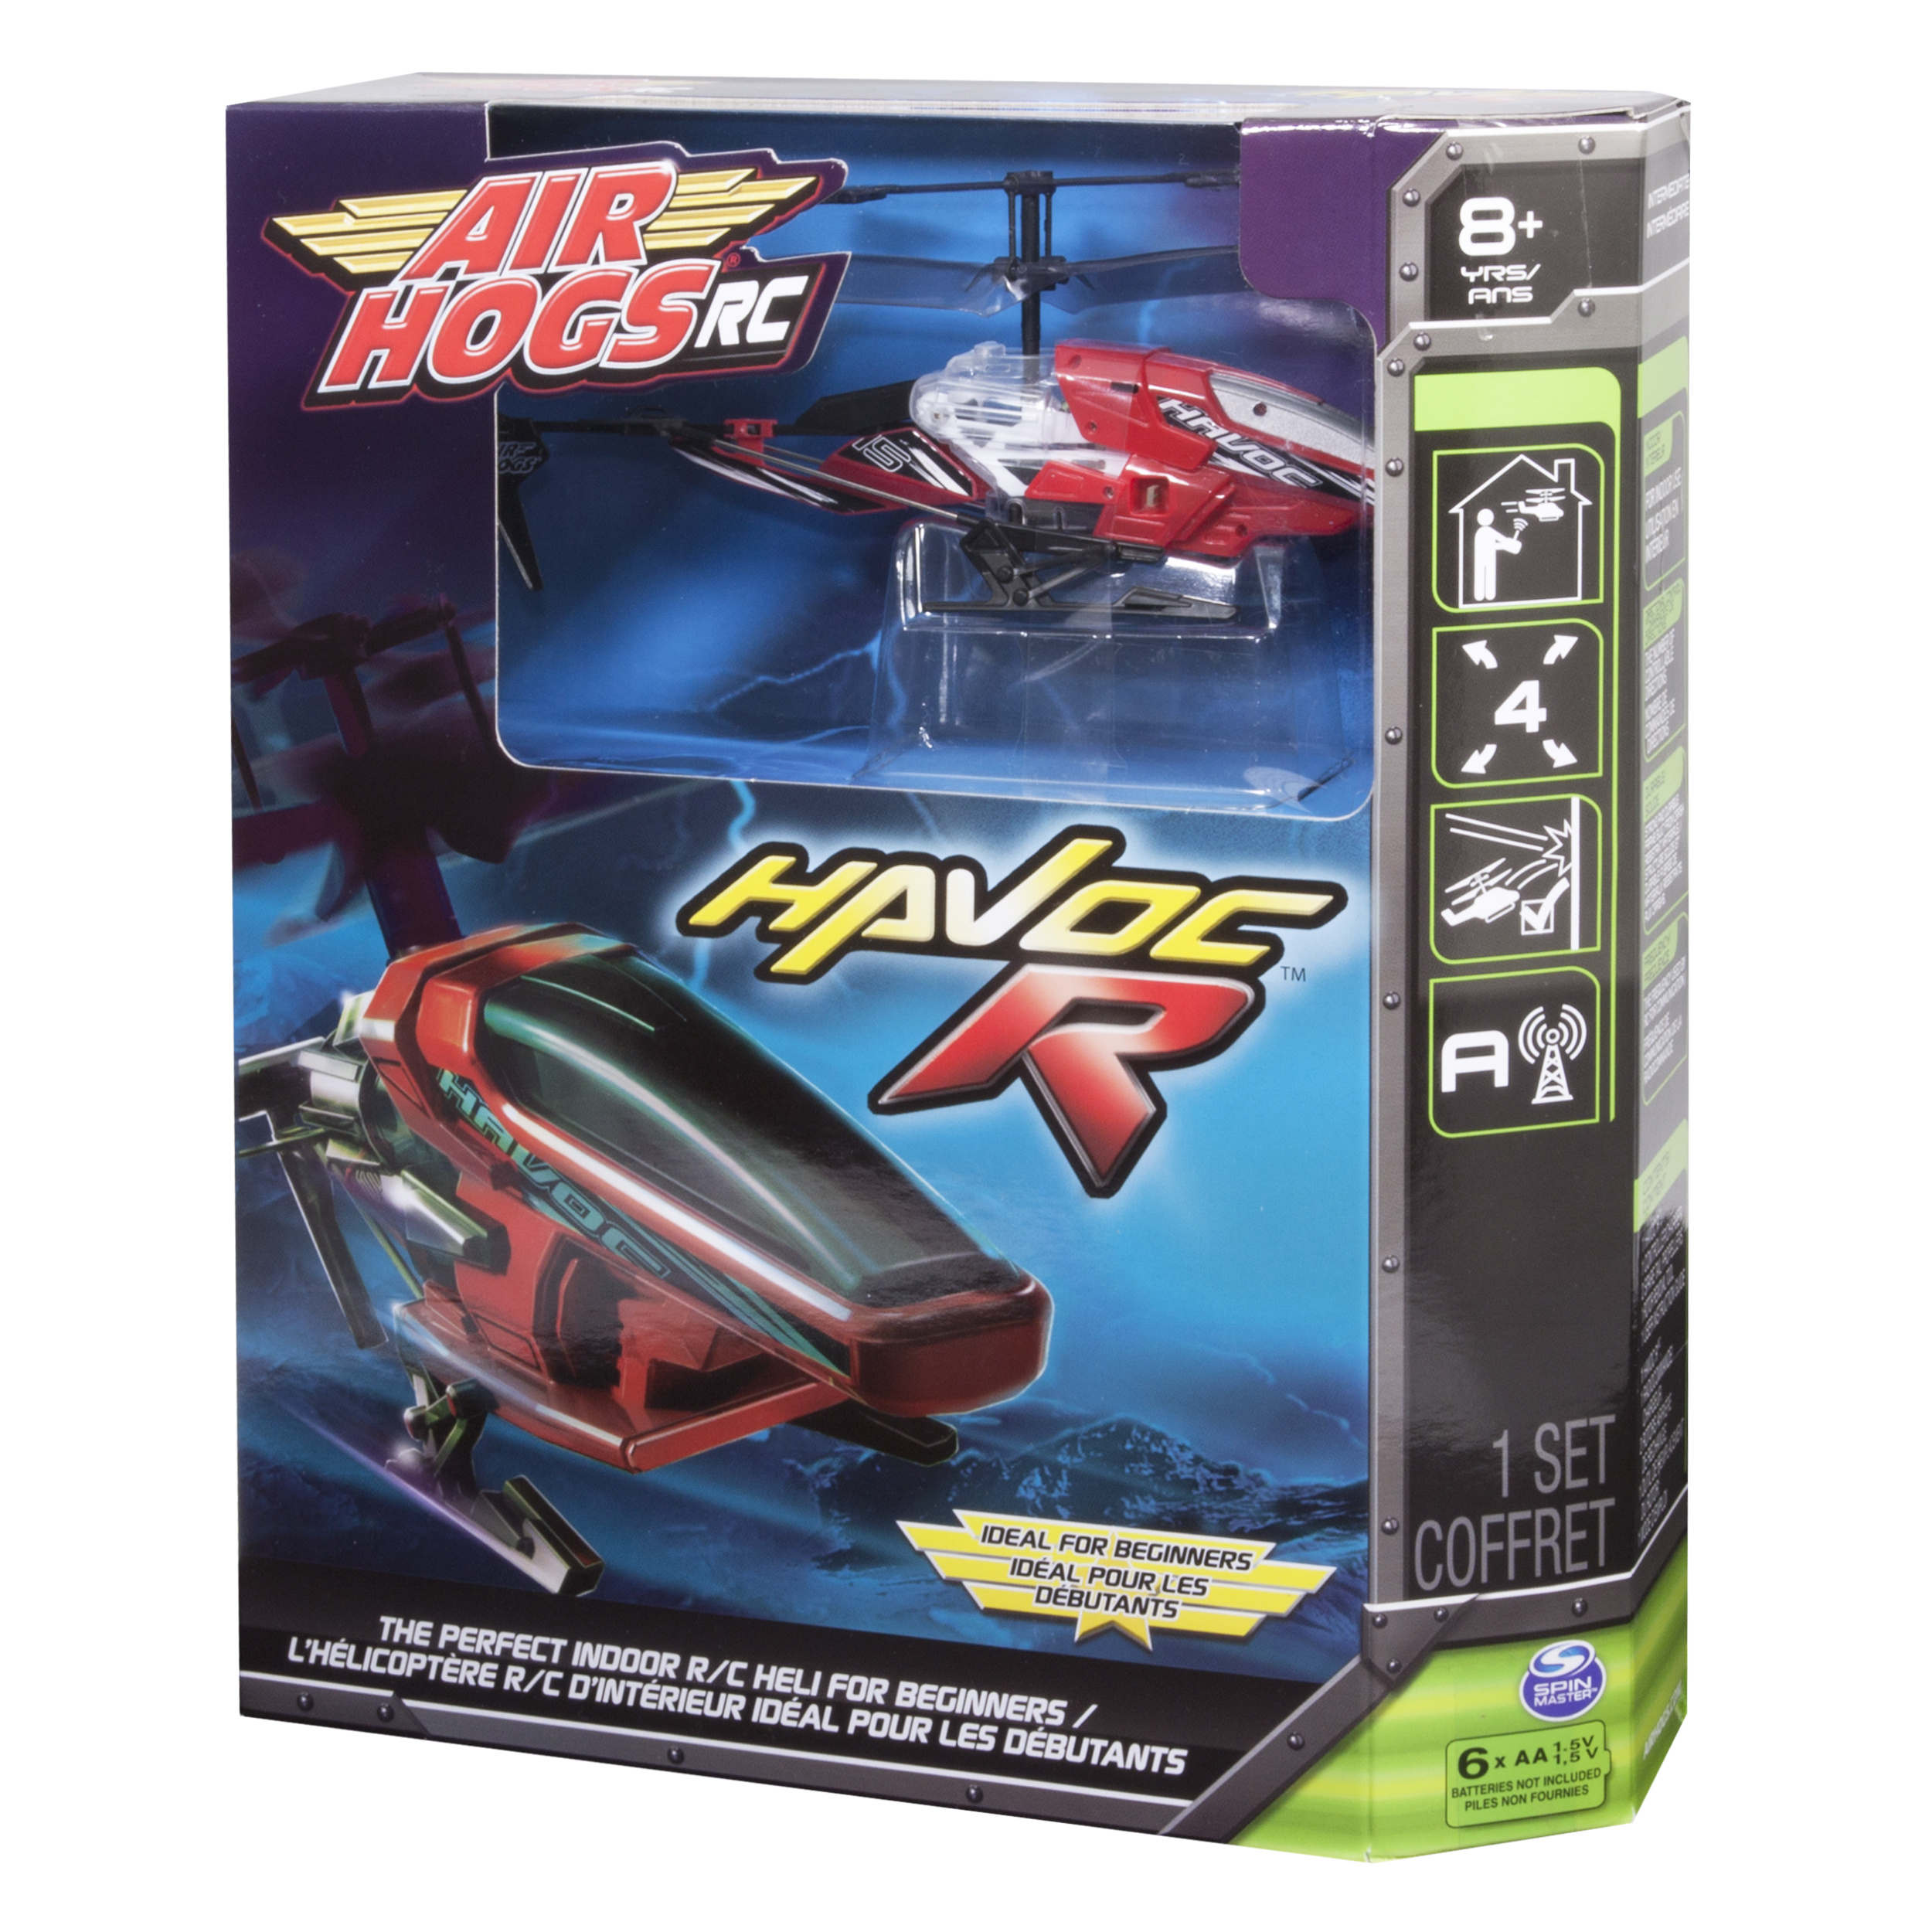 Air Hogs RC Havoc Helicopter- Remote Control Toy Helicopter - image 3 of 3